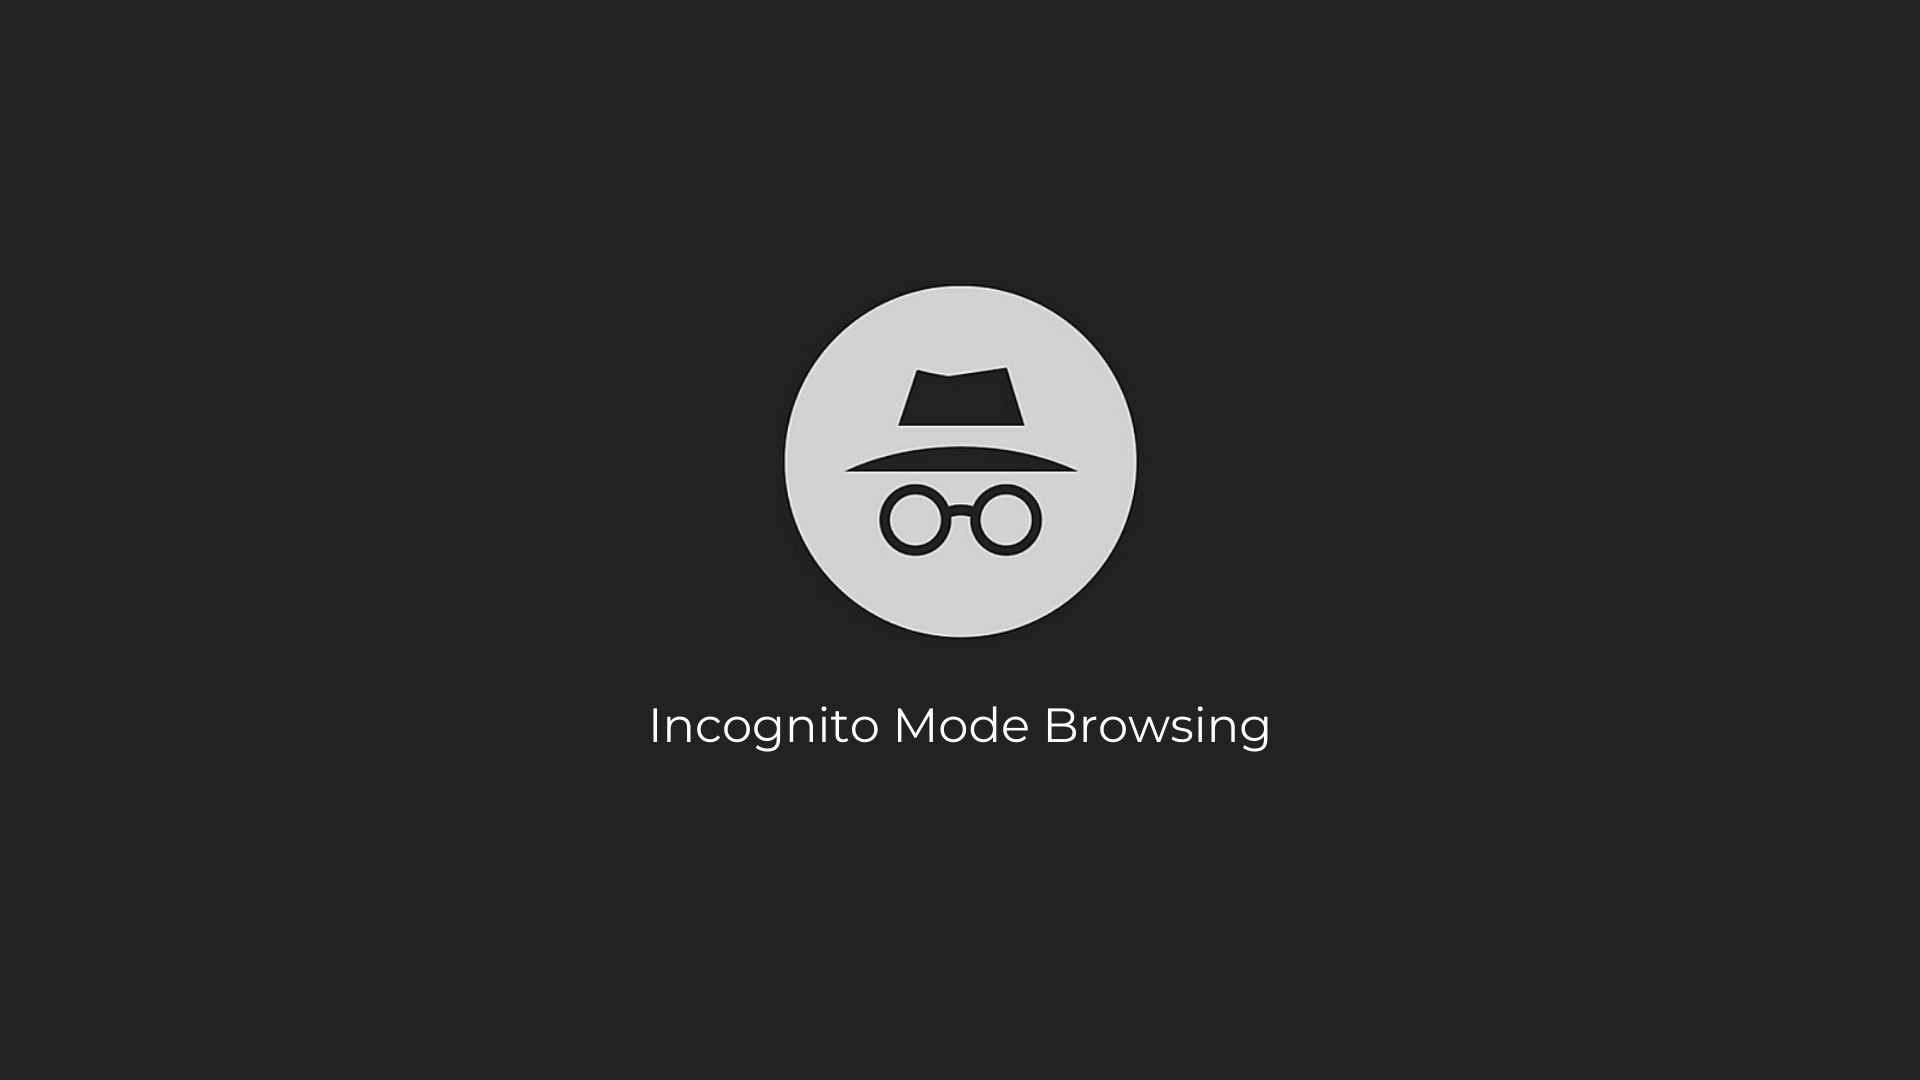 Incognito mode isn’t meant to shield you completely from watching eyes